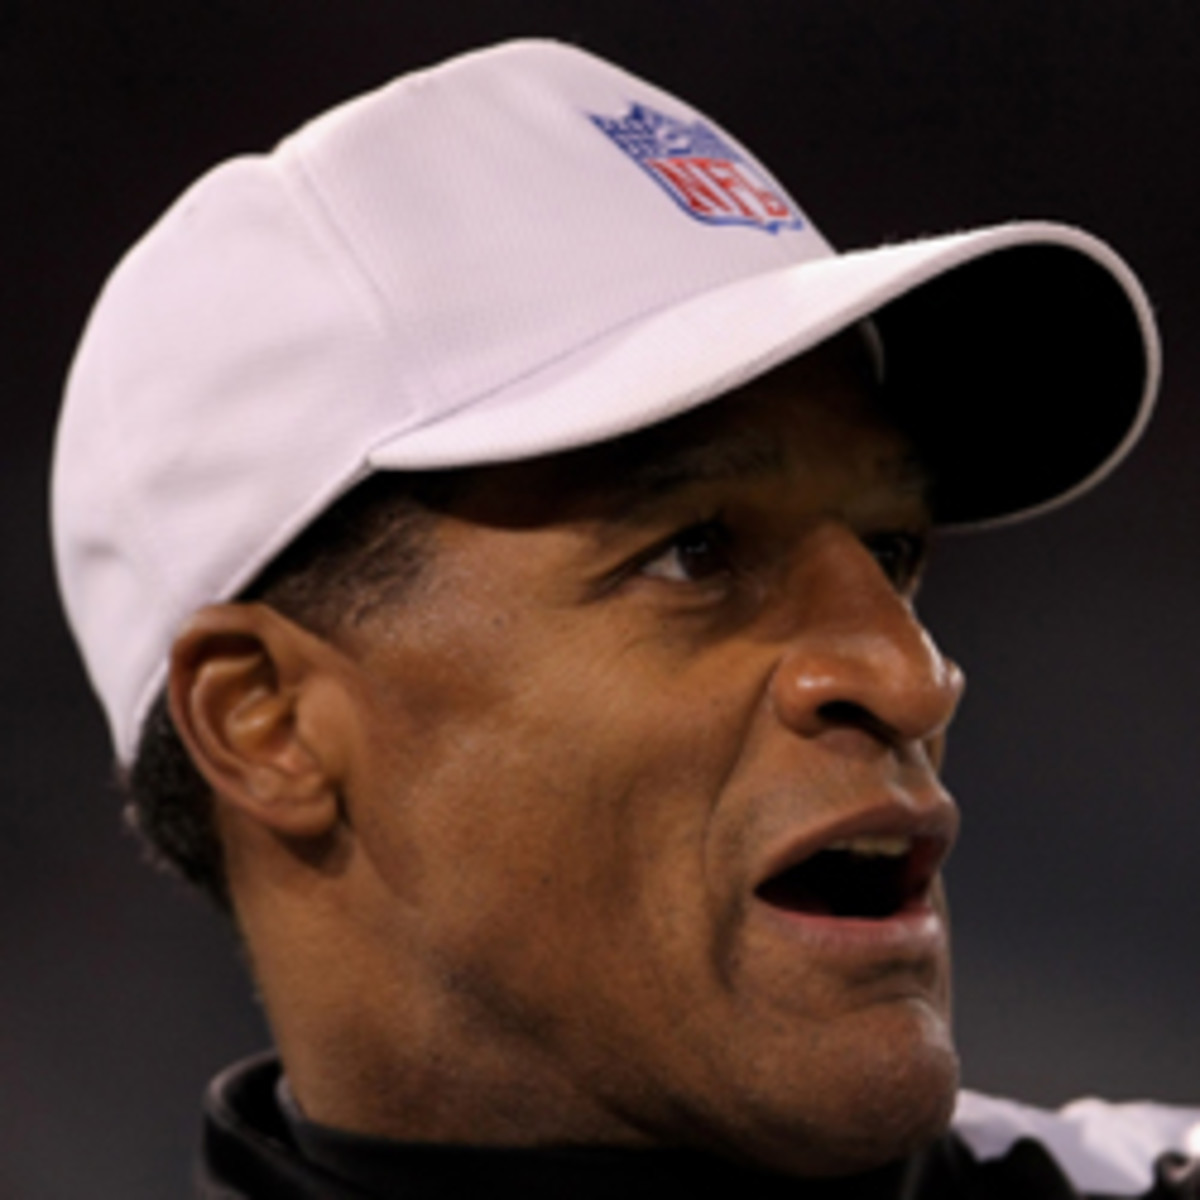 The NFL reportedly has selected Jerome Boger to referee Super Bowl XLVII. (Doug Pensinger/Getty Images)